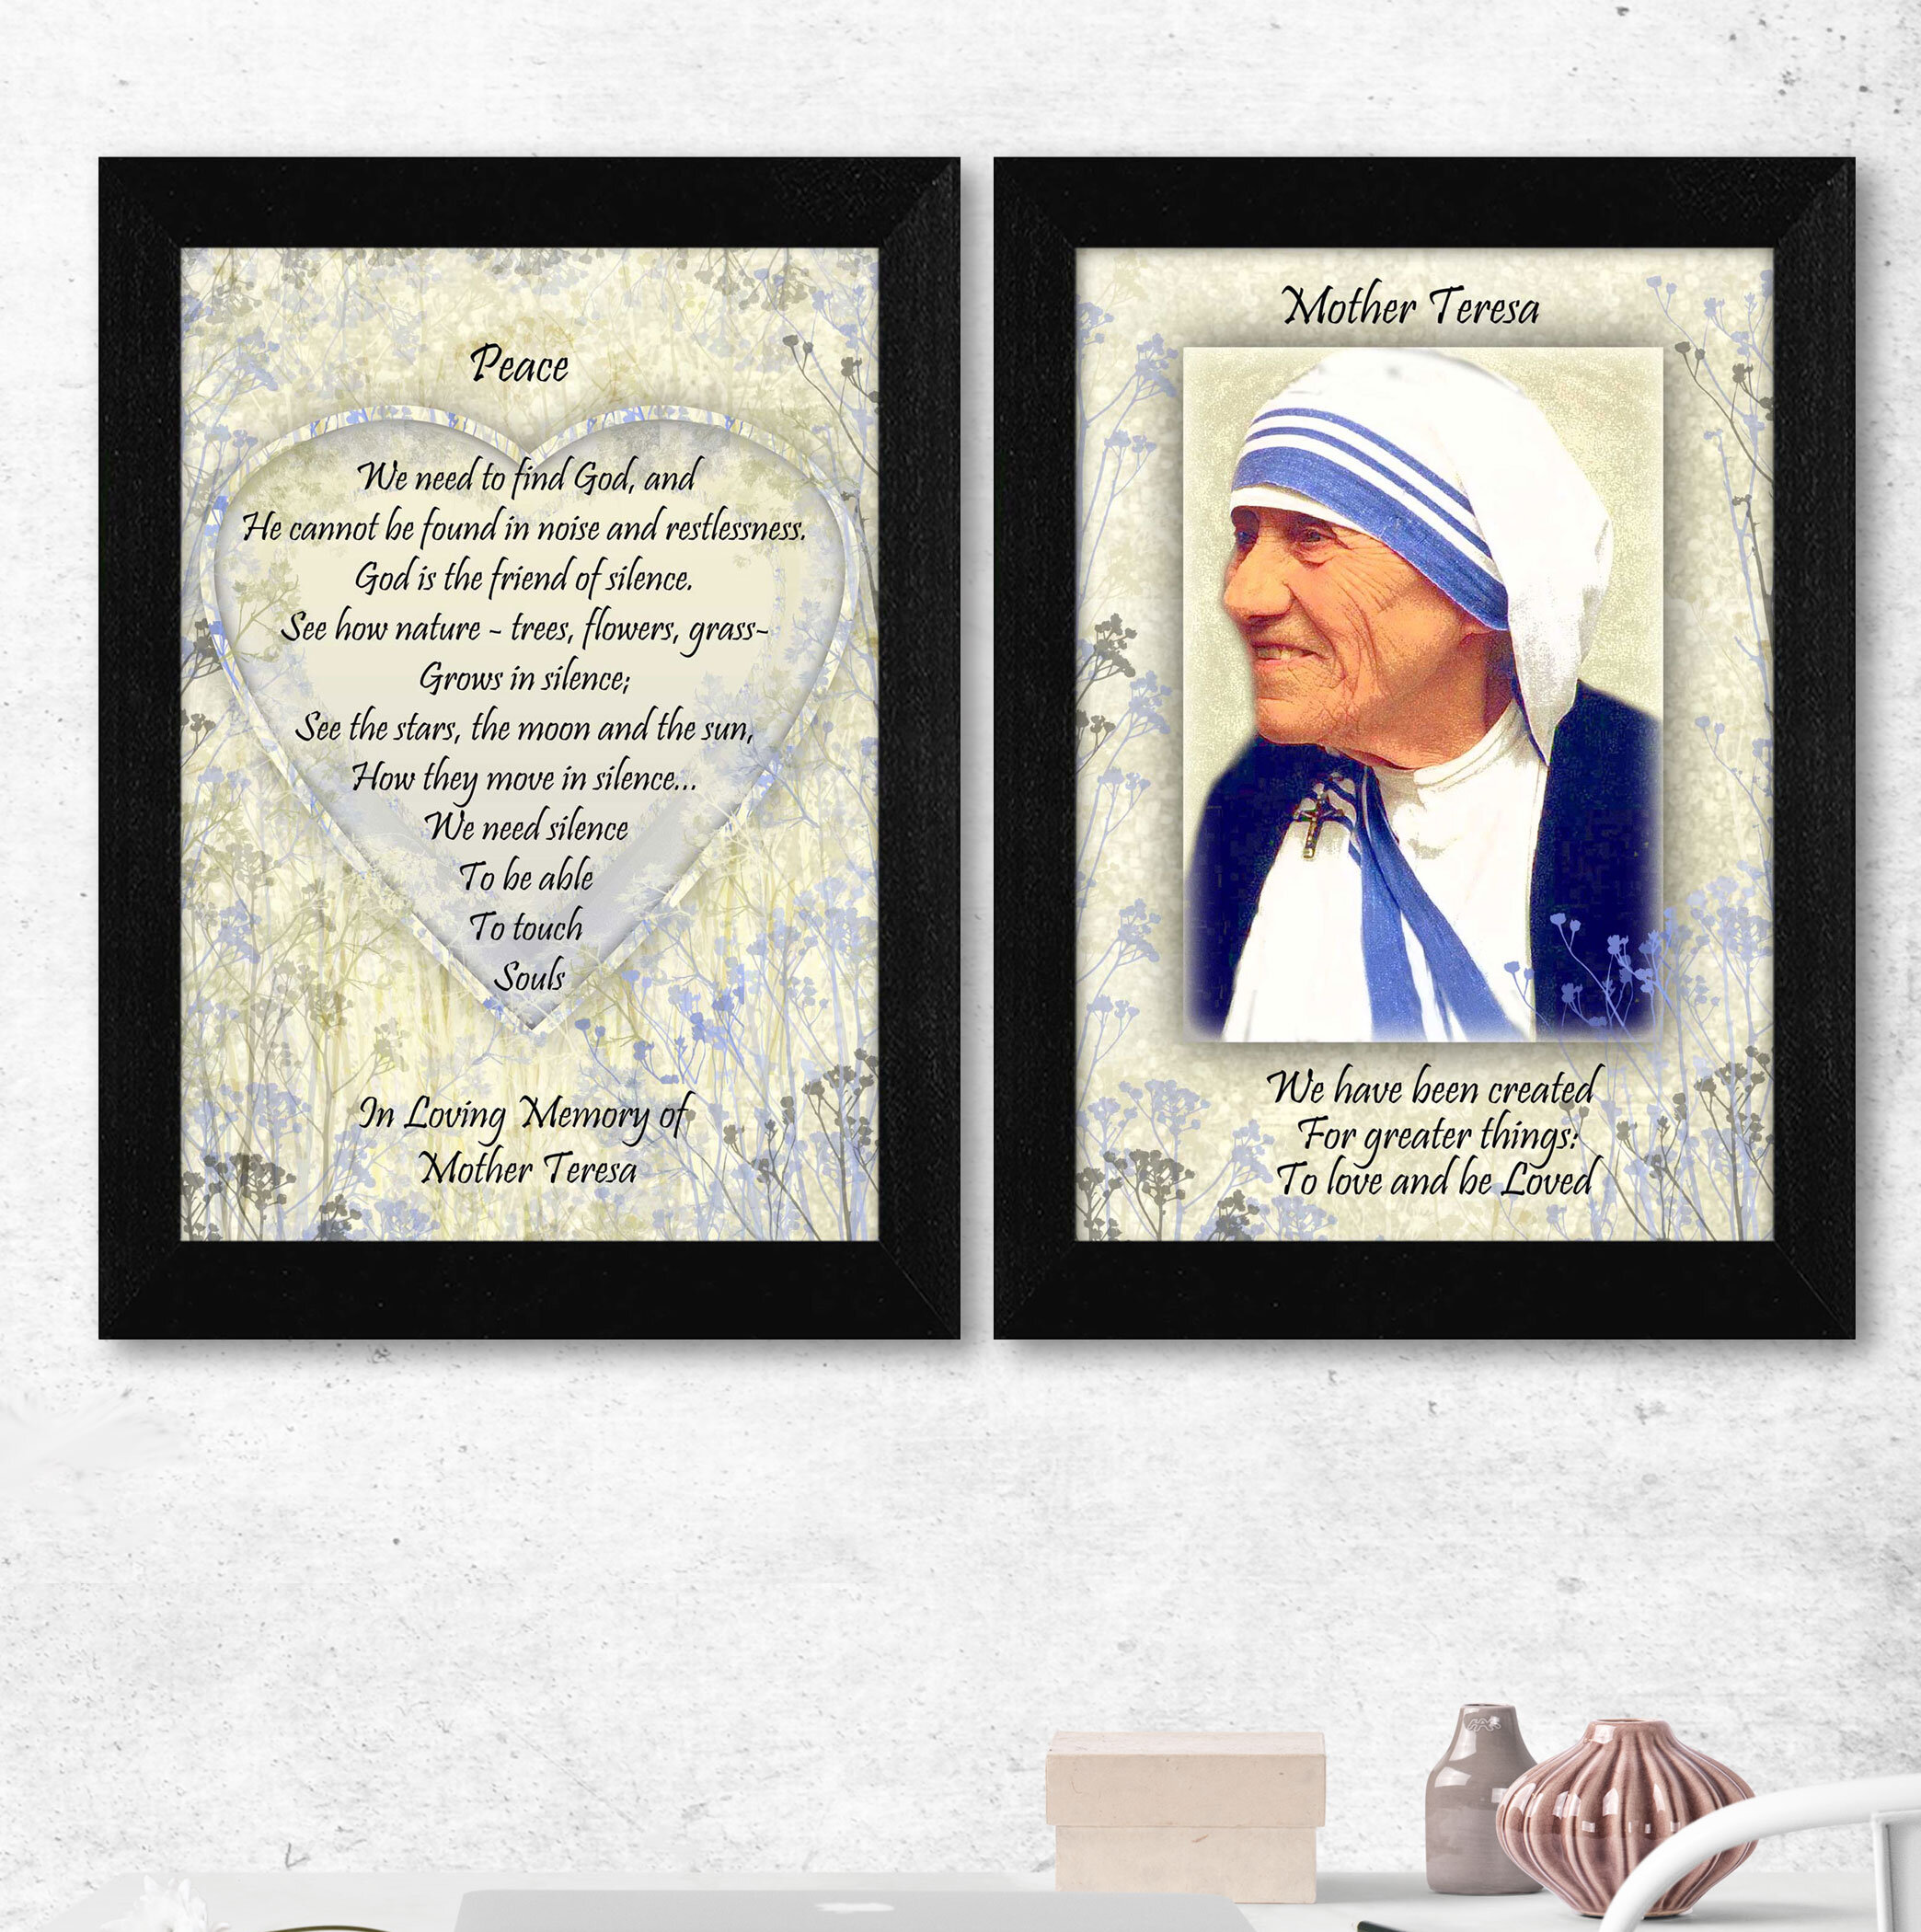 Red Barrel Studio Peace Mother Teresa Quotes By Kathryn Barnes 2 Piece Picture Frame Graphic Art Wayfair